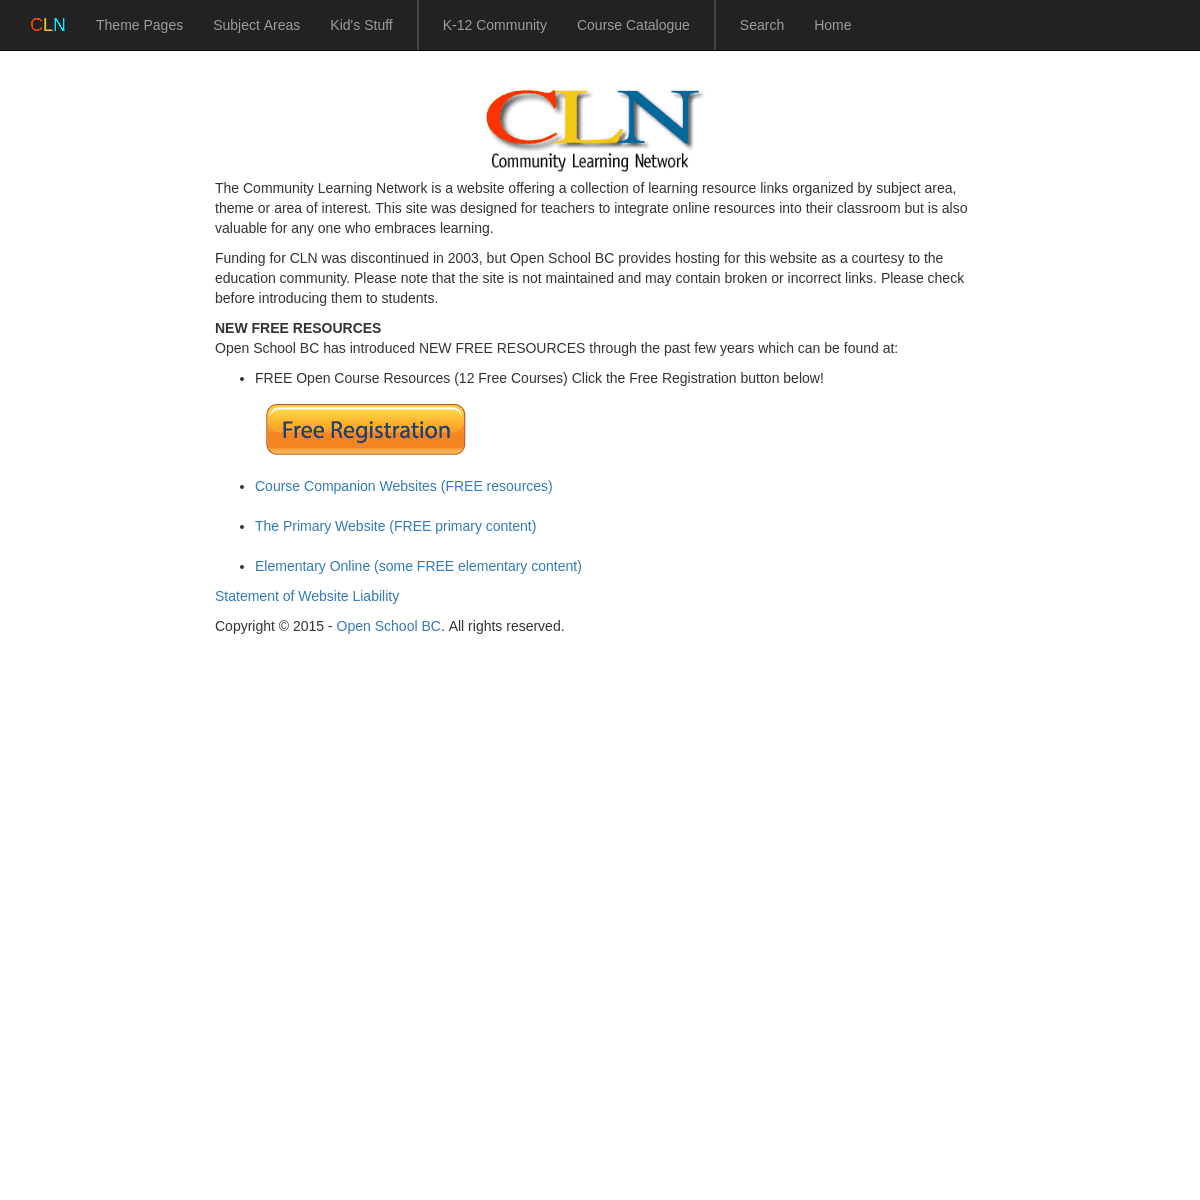 A complete backup of cln.org